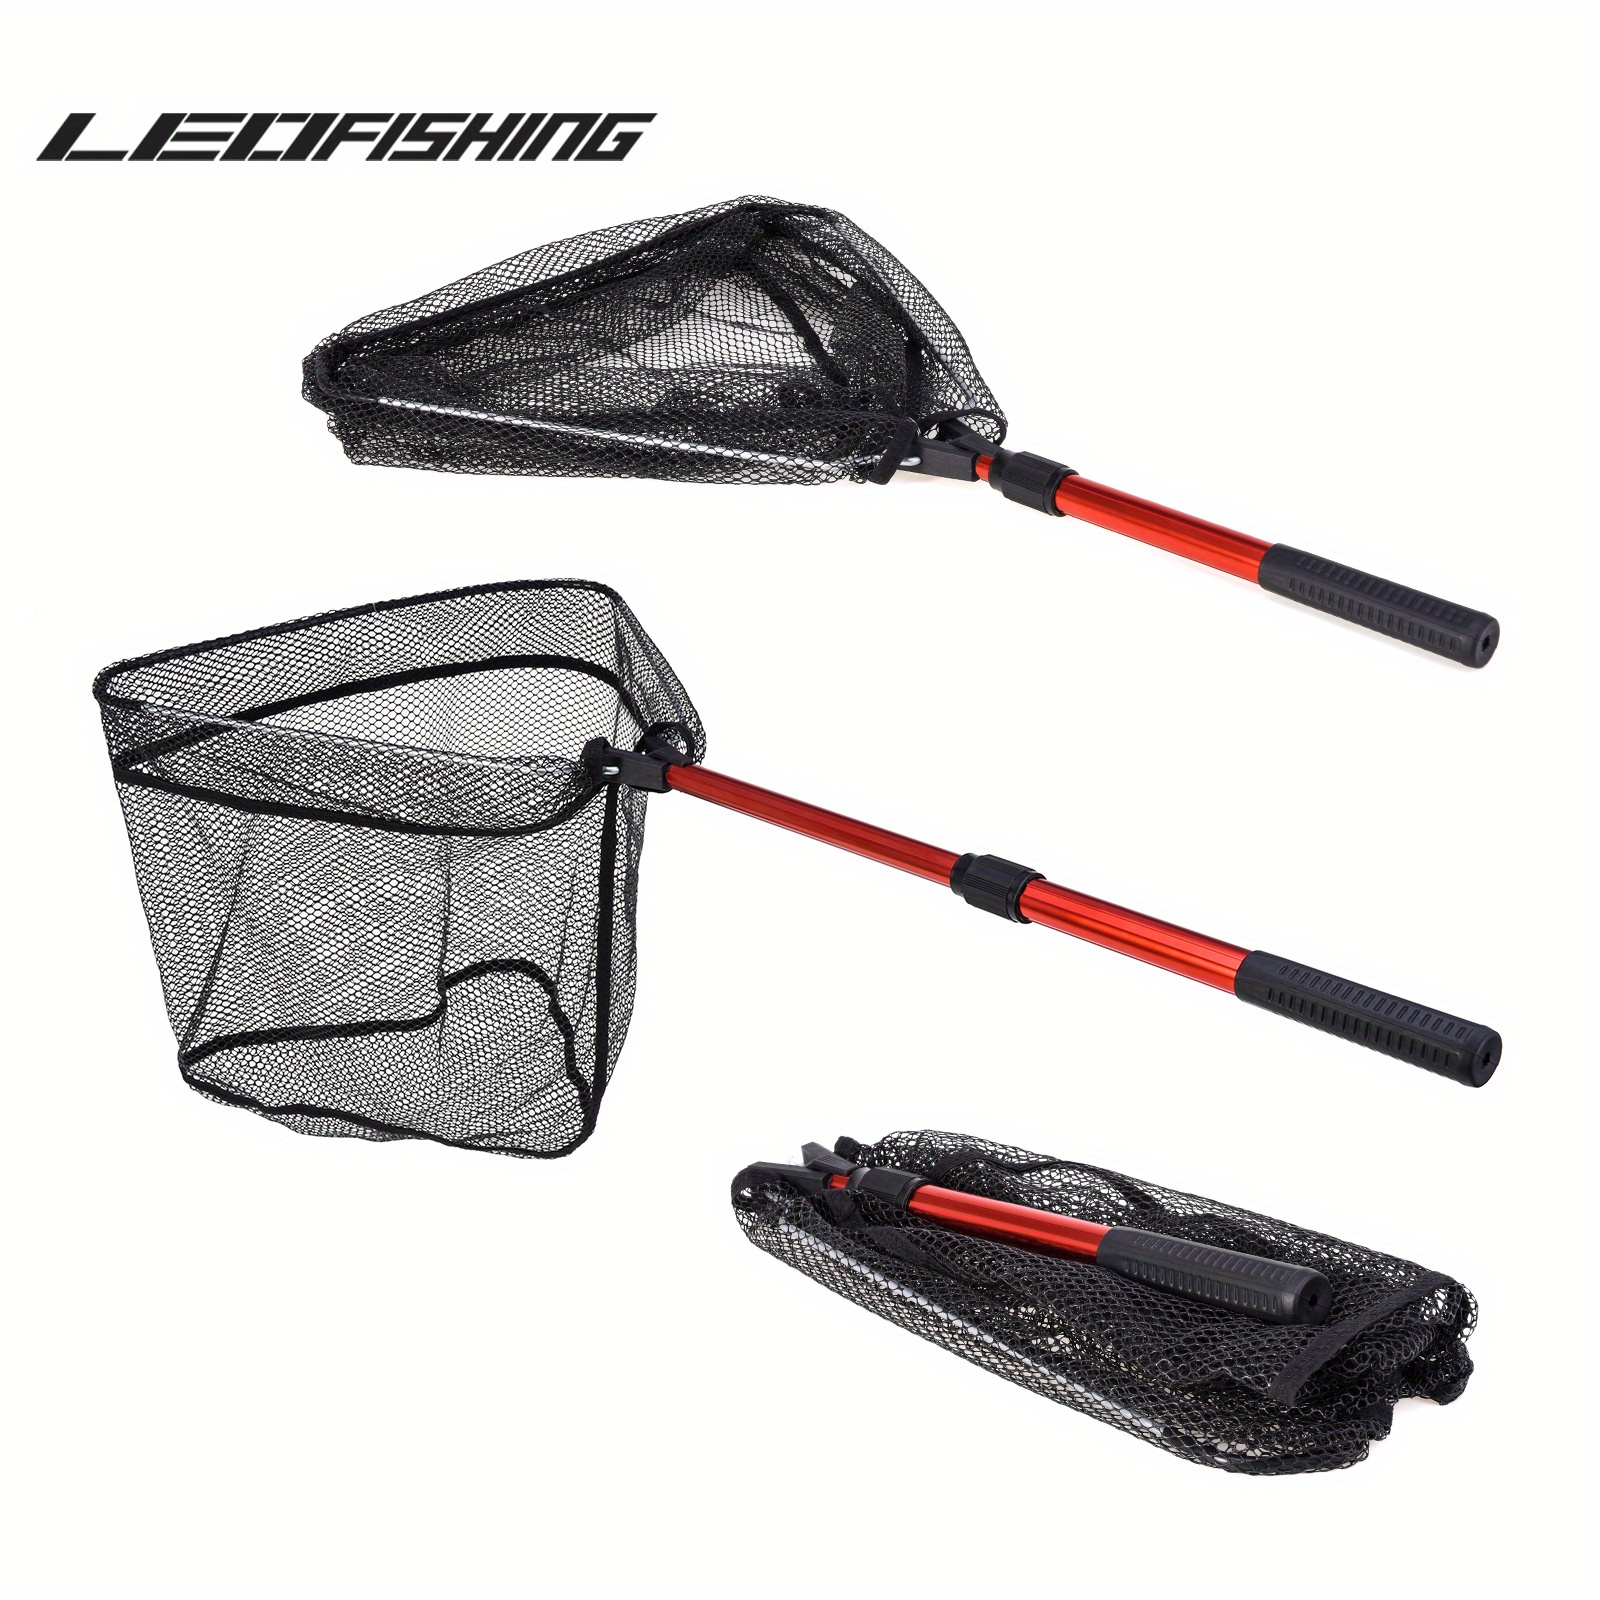 1pc Durable Foldable Fishing Net with Rubber Handle - Safe Fish Catching  and Releasing